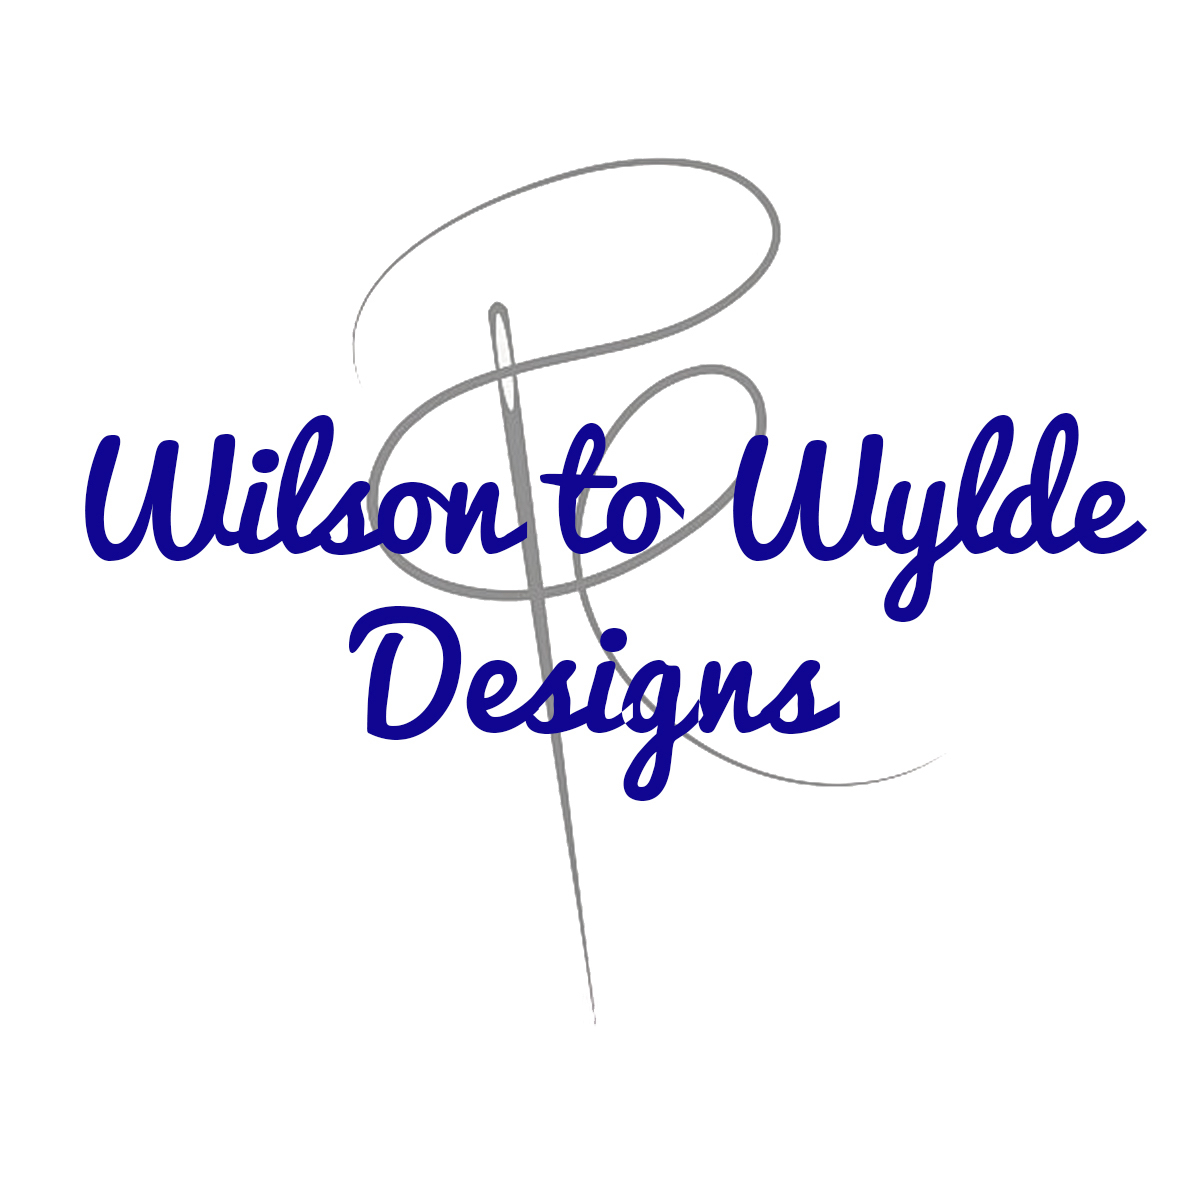 Forest, Wilson to Wylde Designs Cushions